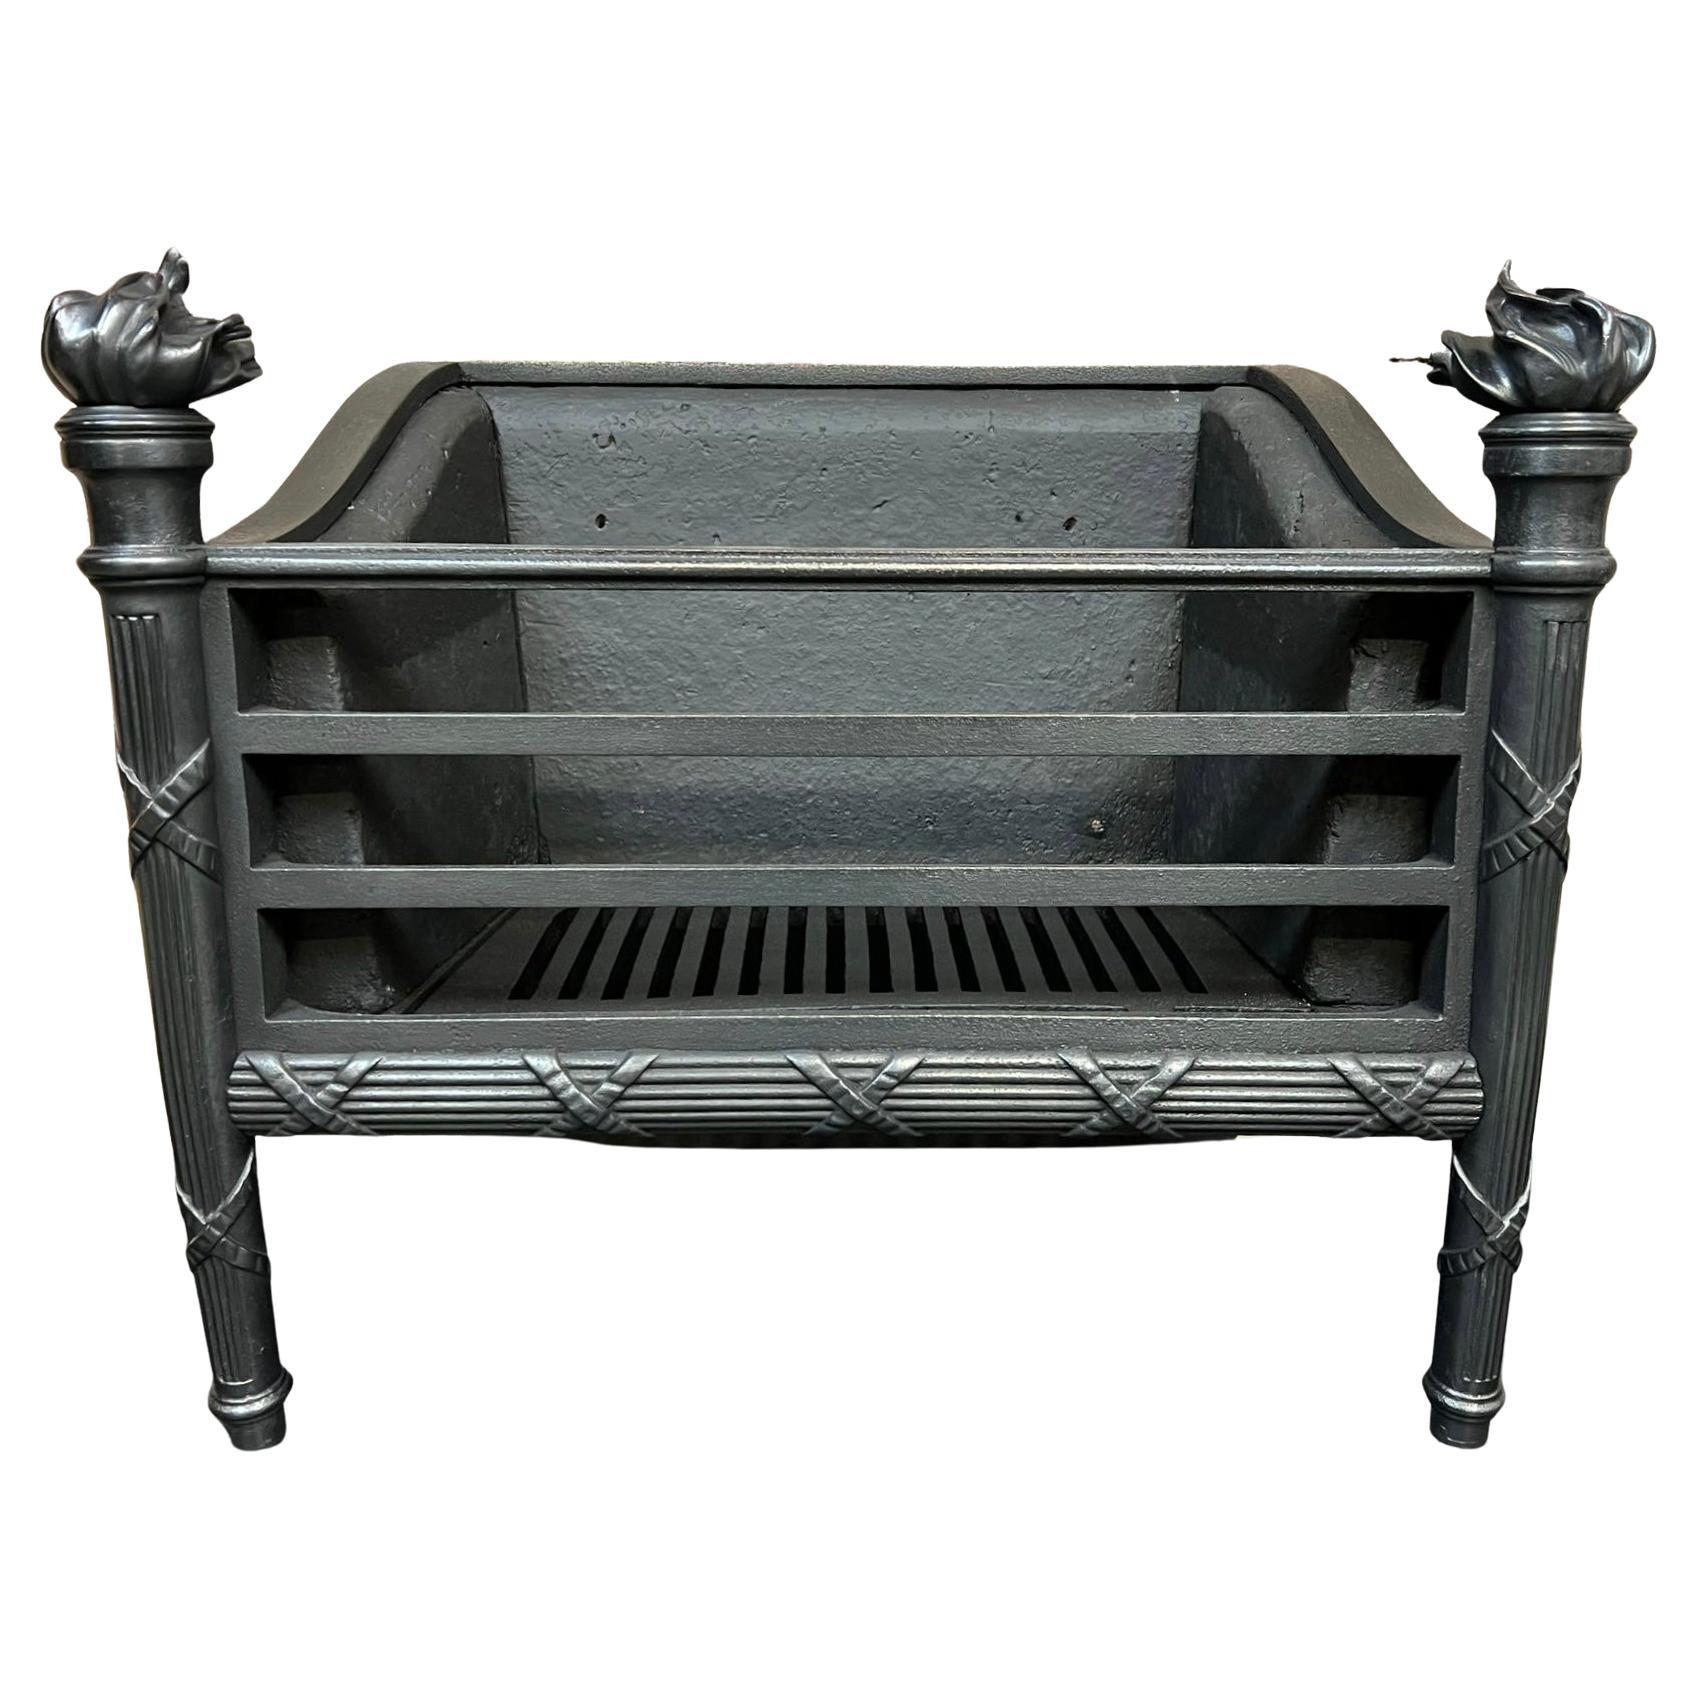 19th Centrury Cast Iron Fireplace Basket Grate For Sale at 1stDibs